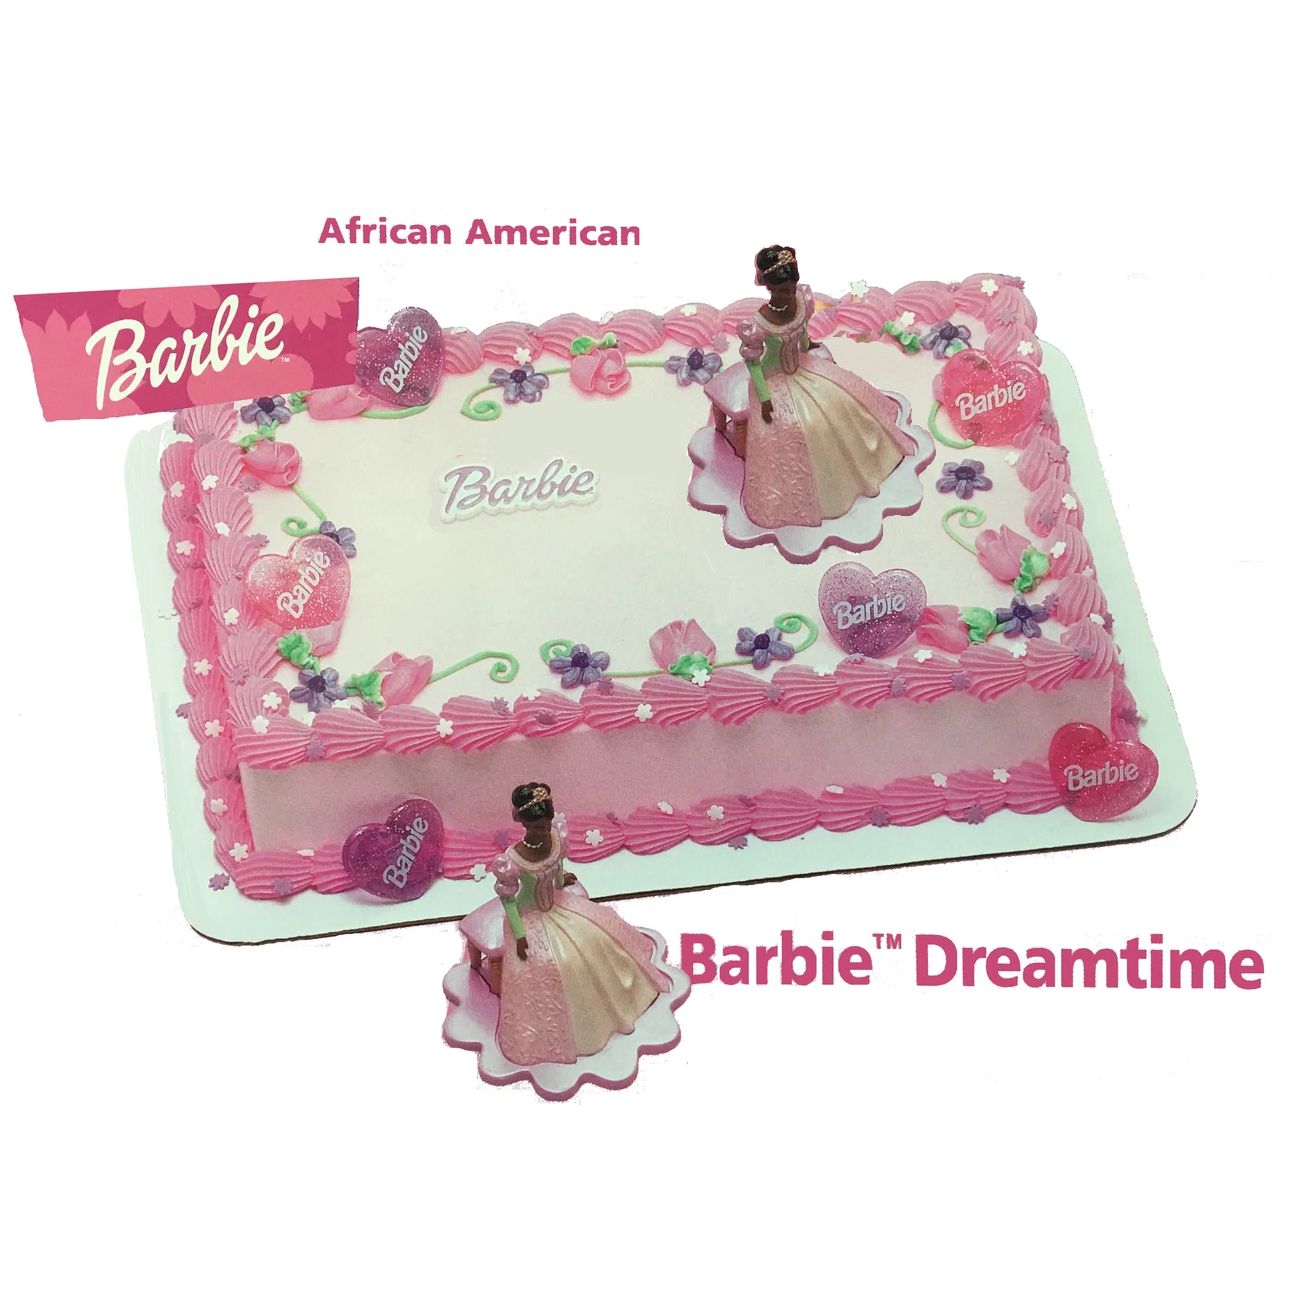 BESTONZON Resin Cake Figurine Cute Sleeping Baby Angel with Wings Cake  Decoration Ornament (Girl) : Amazon.in: Home & Kitchen